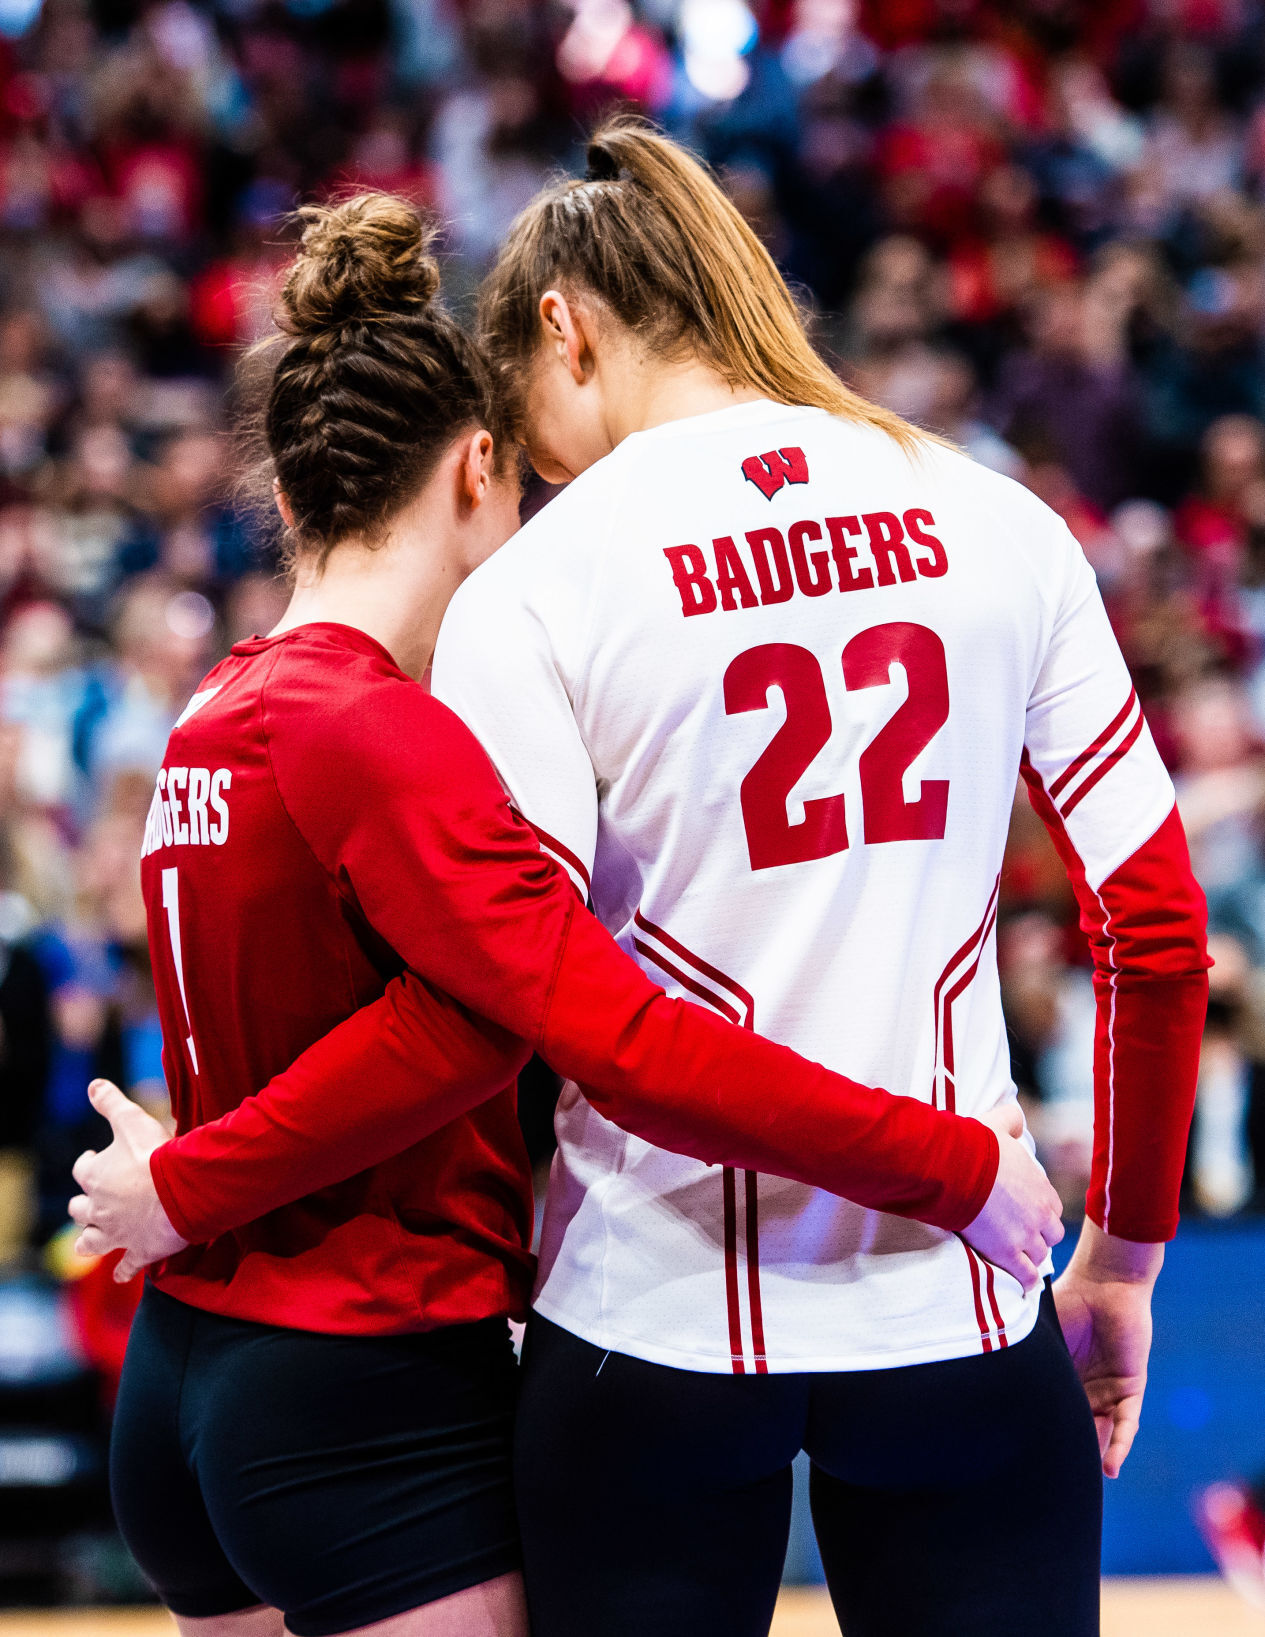 Badgers Volleyball Champs 121821 02-12192021162001